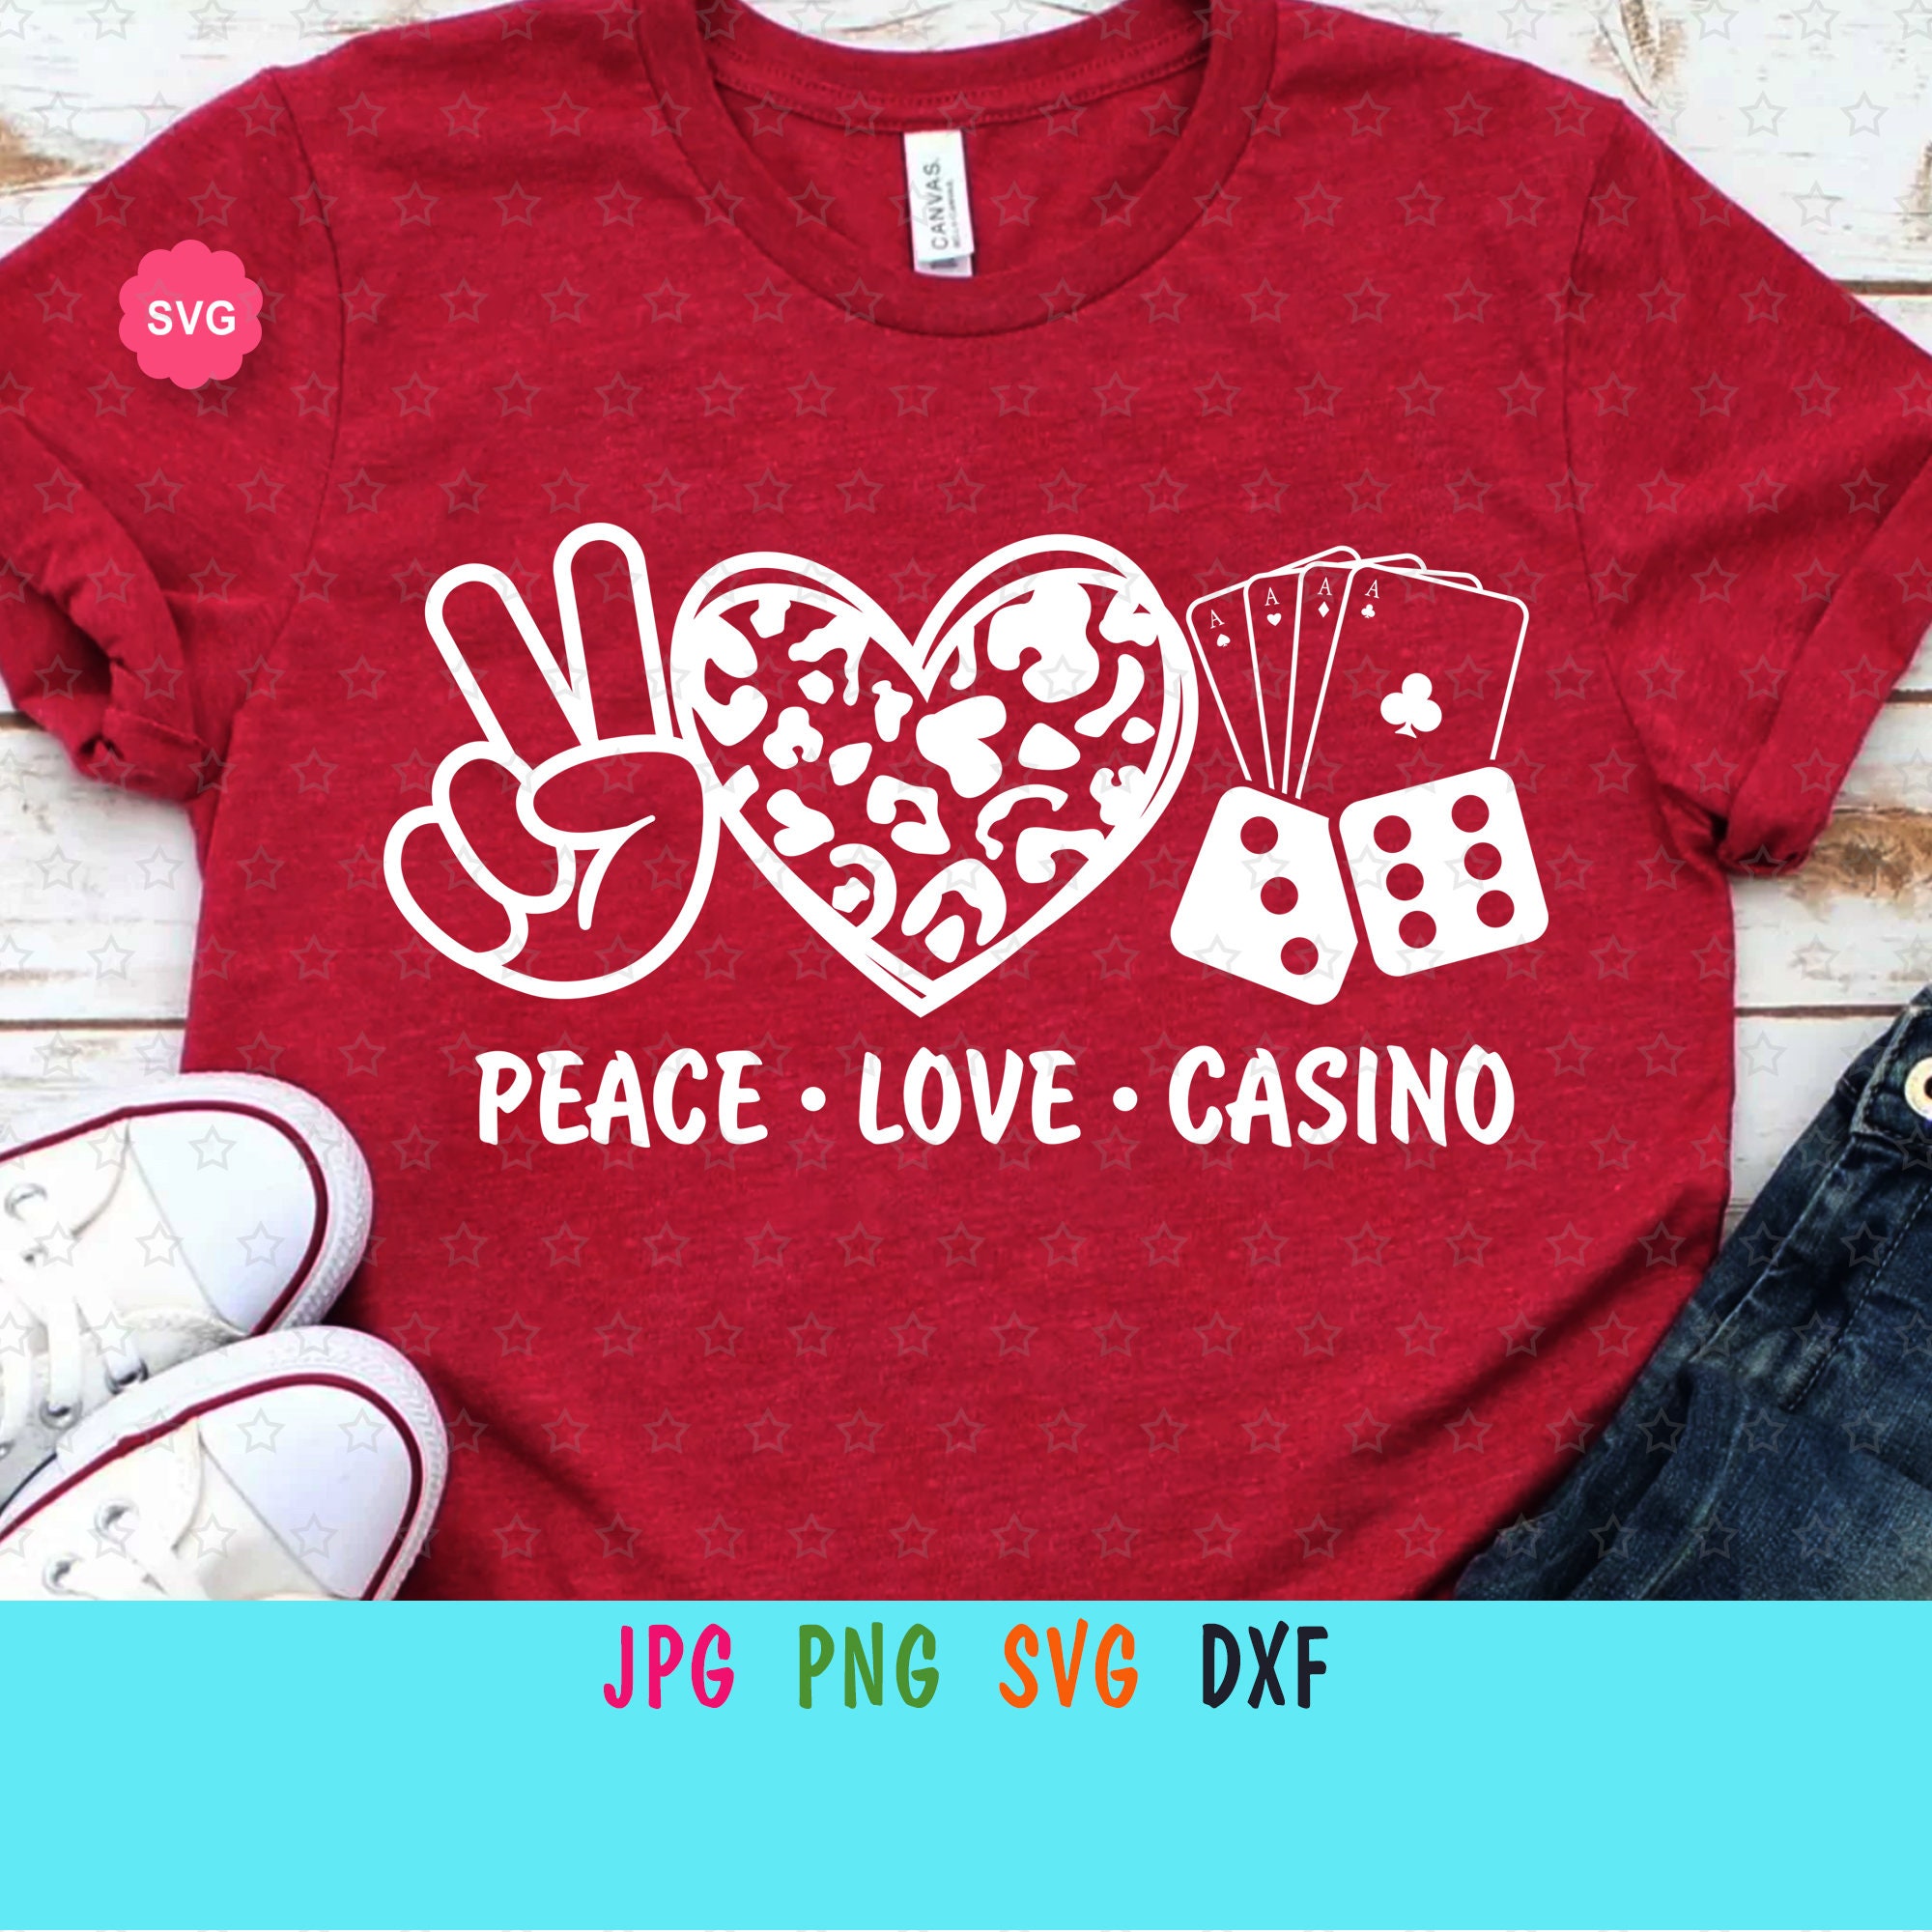 Learn more about phlove casino